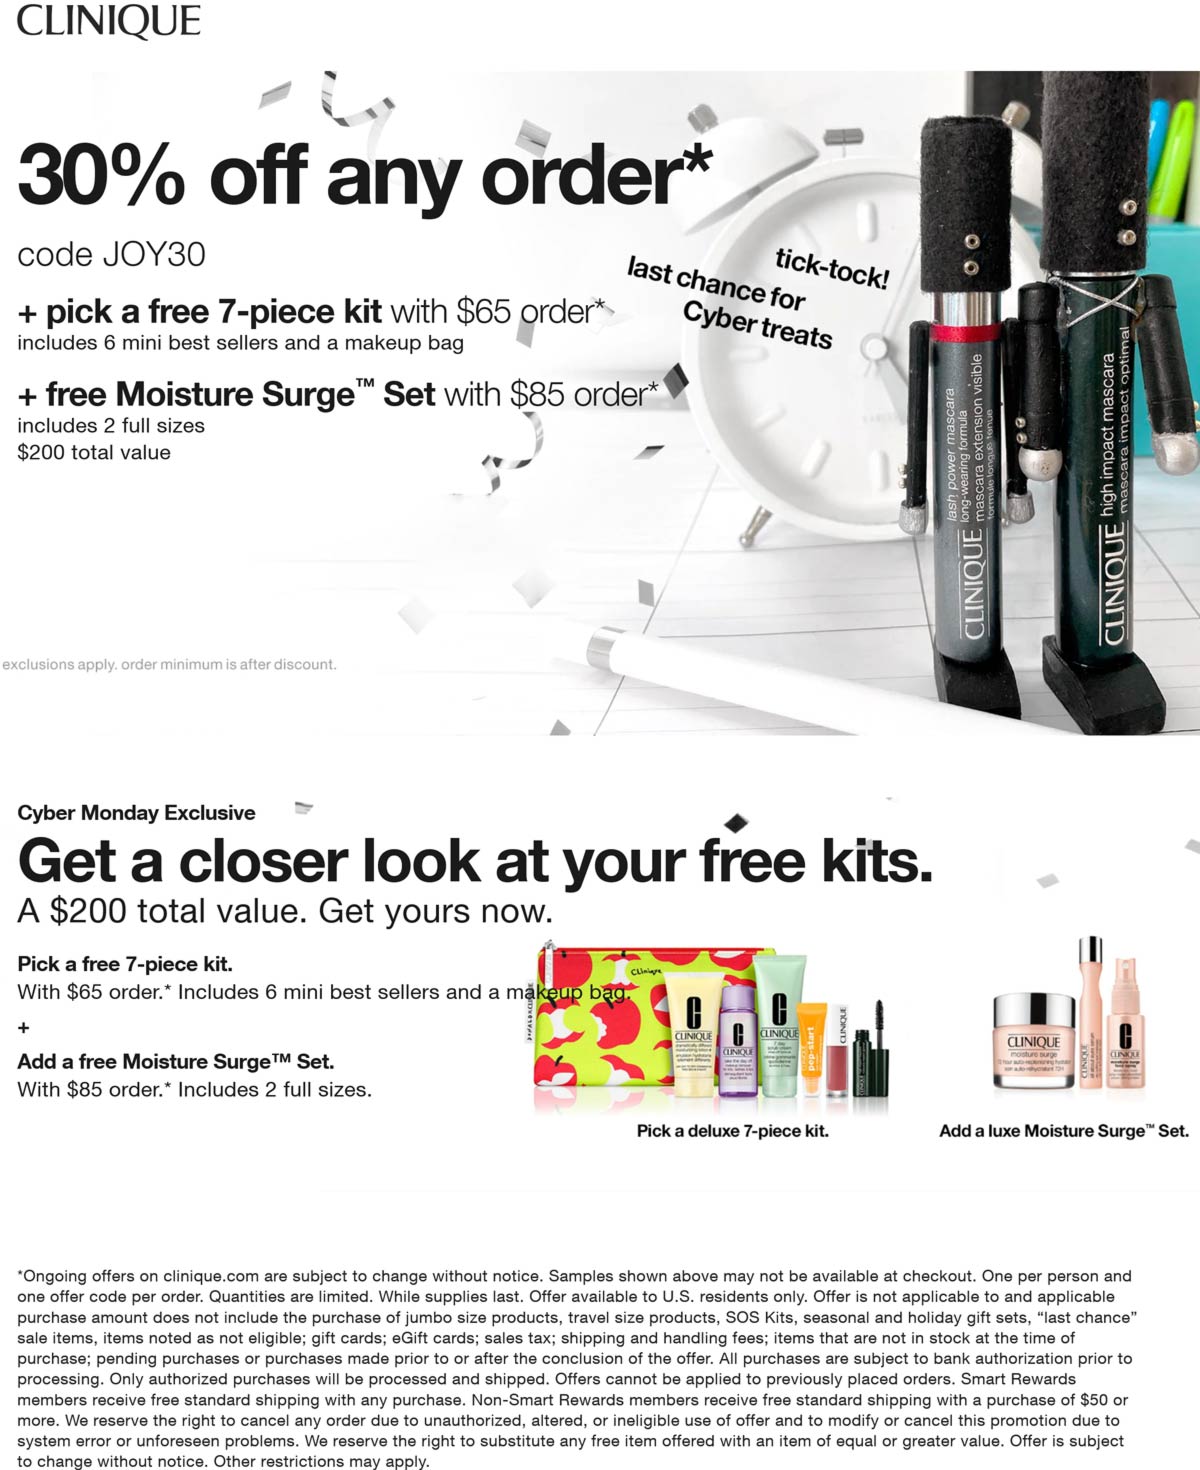 Clinique stores Coupon  30% off + $200 in free stuff on $65+ spent at Clinique via promo code JOY30 #clinique 